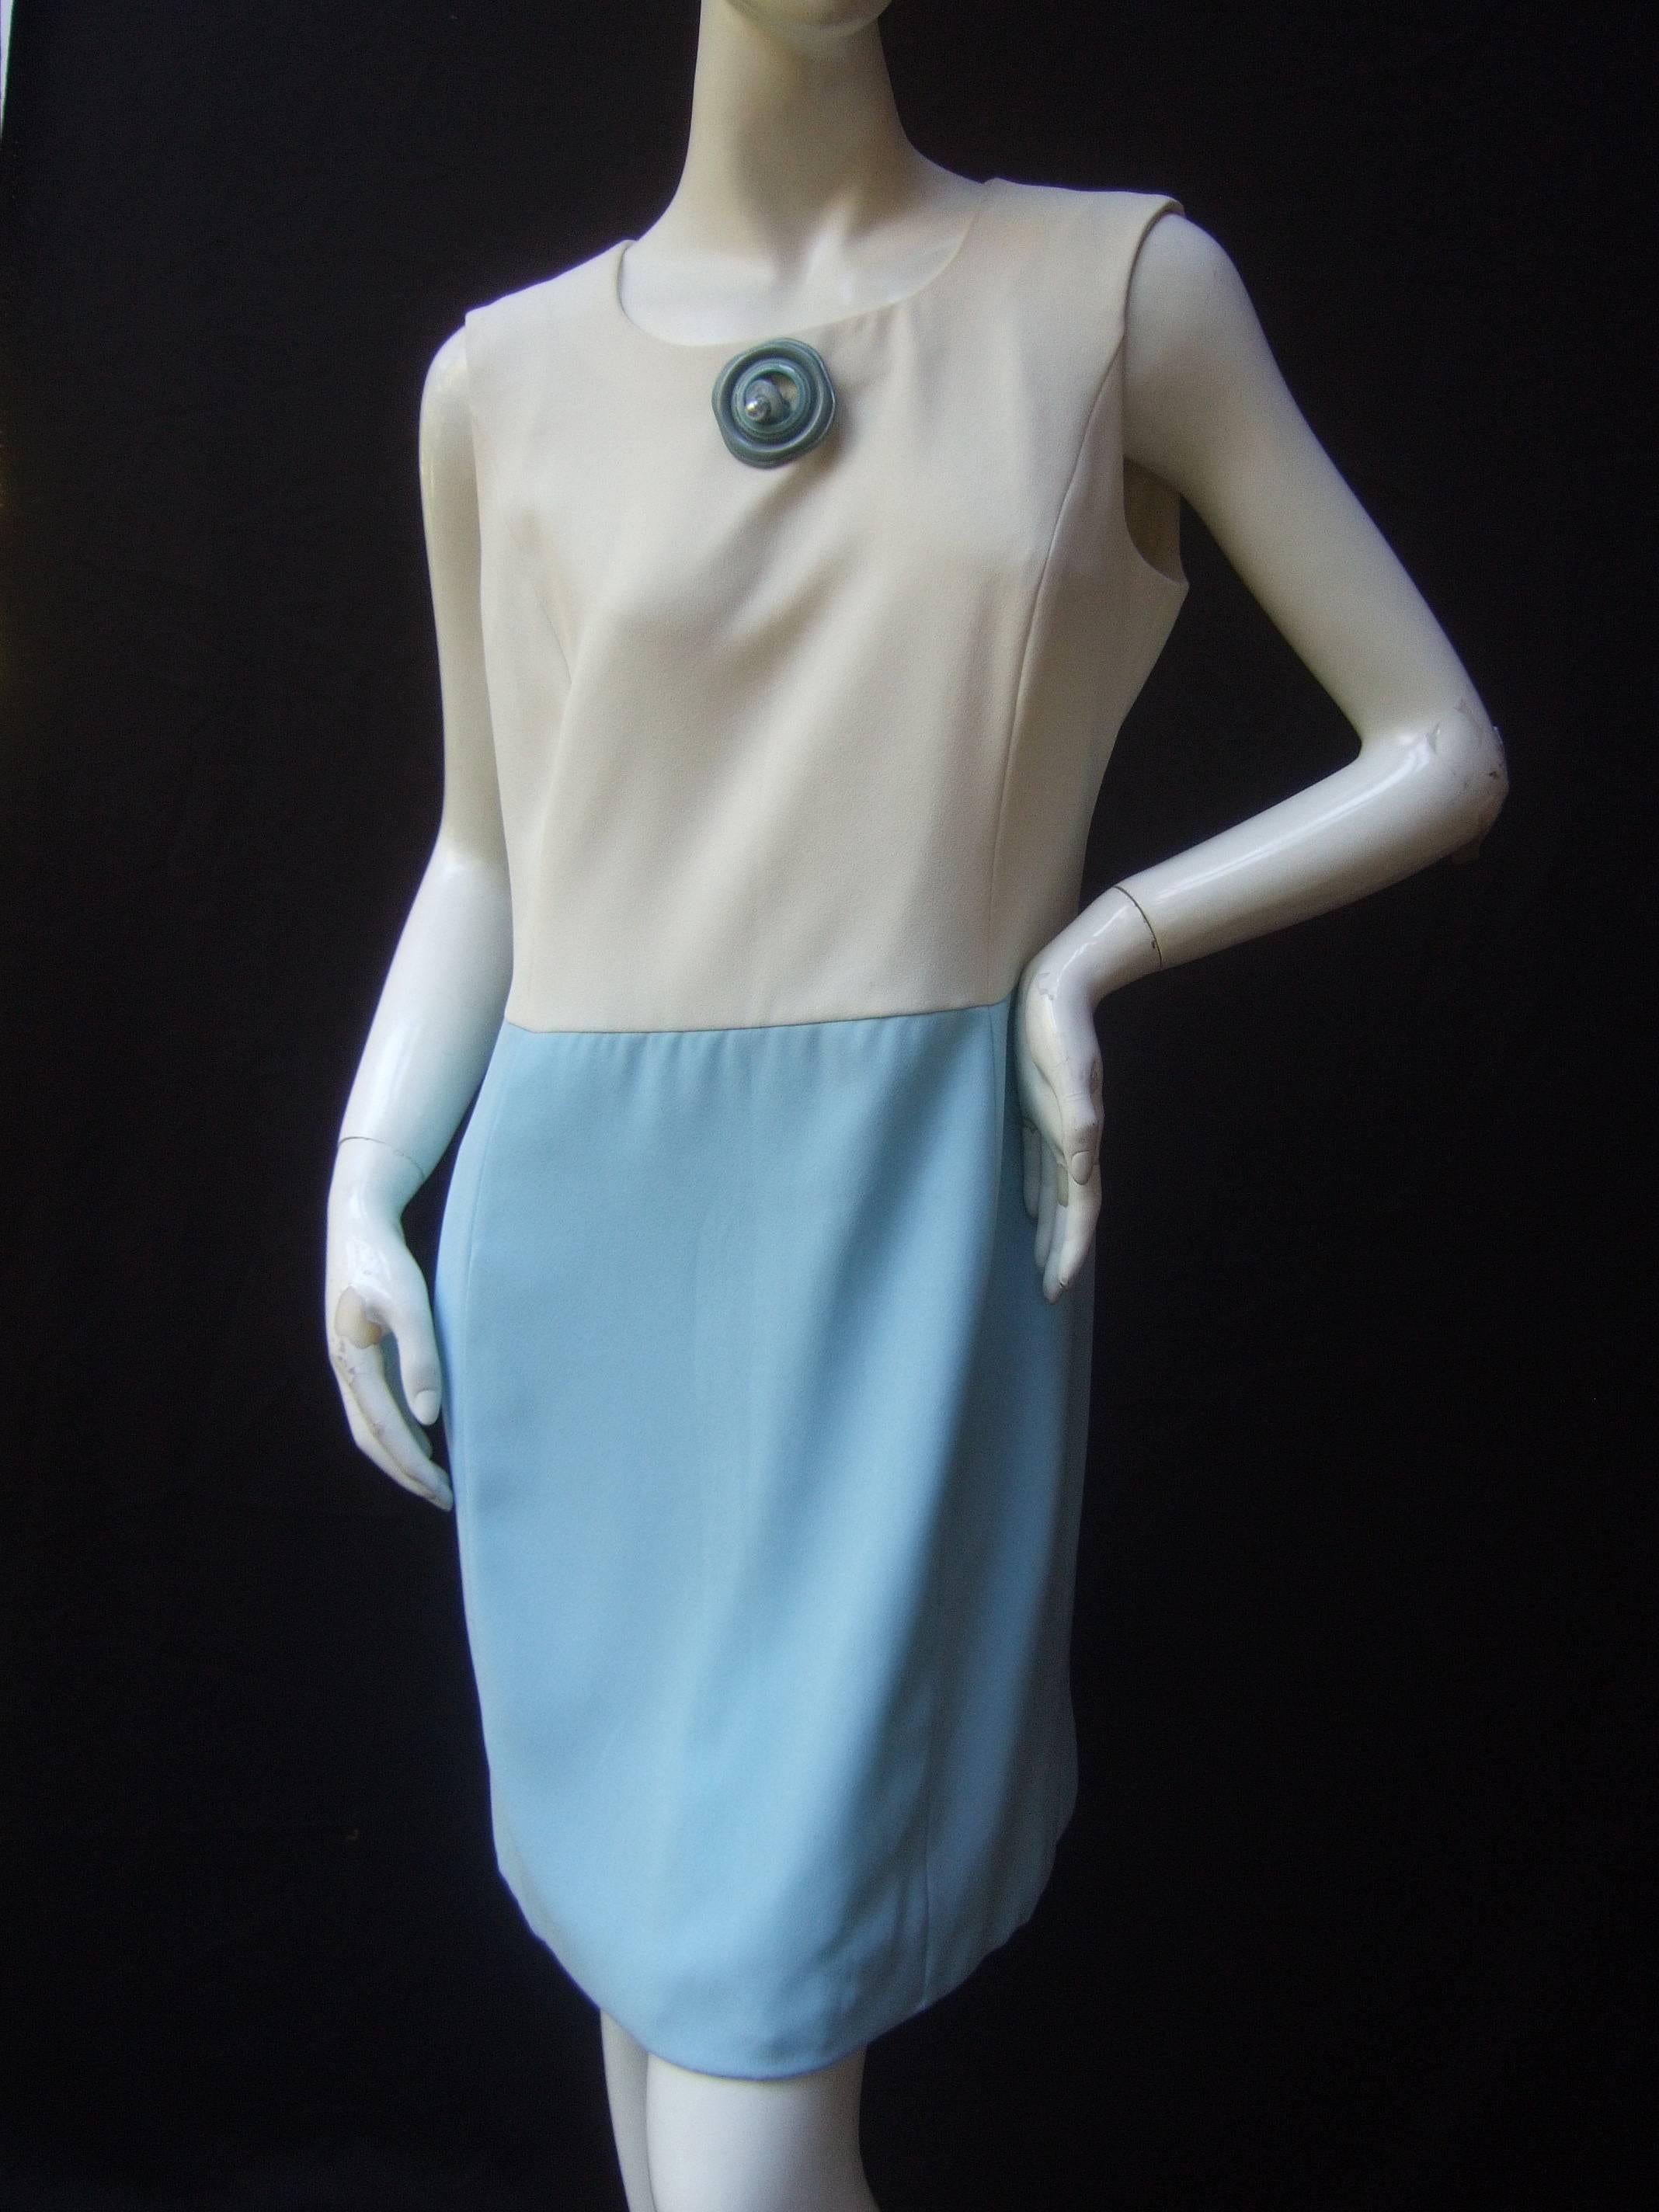 Pierre Cardin Mod white & turquoise sheath dress 
The chic retro designer dress is designed with a white 
shell top combined with a pale aqua blue 
skirt section 

The neckline is adorned with a large pale blue lucite
circular mock button